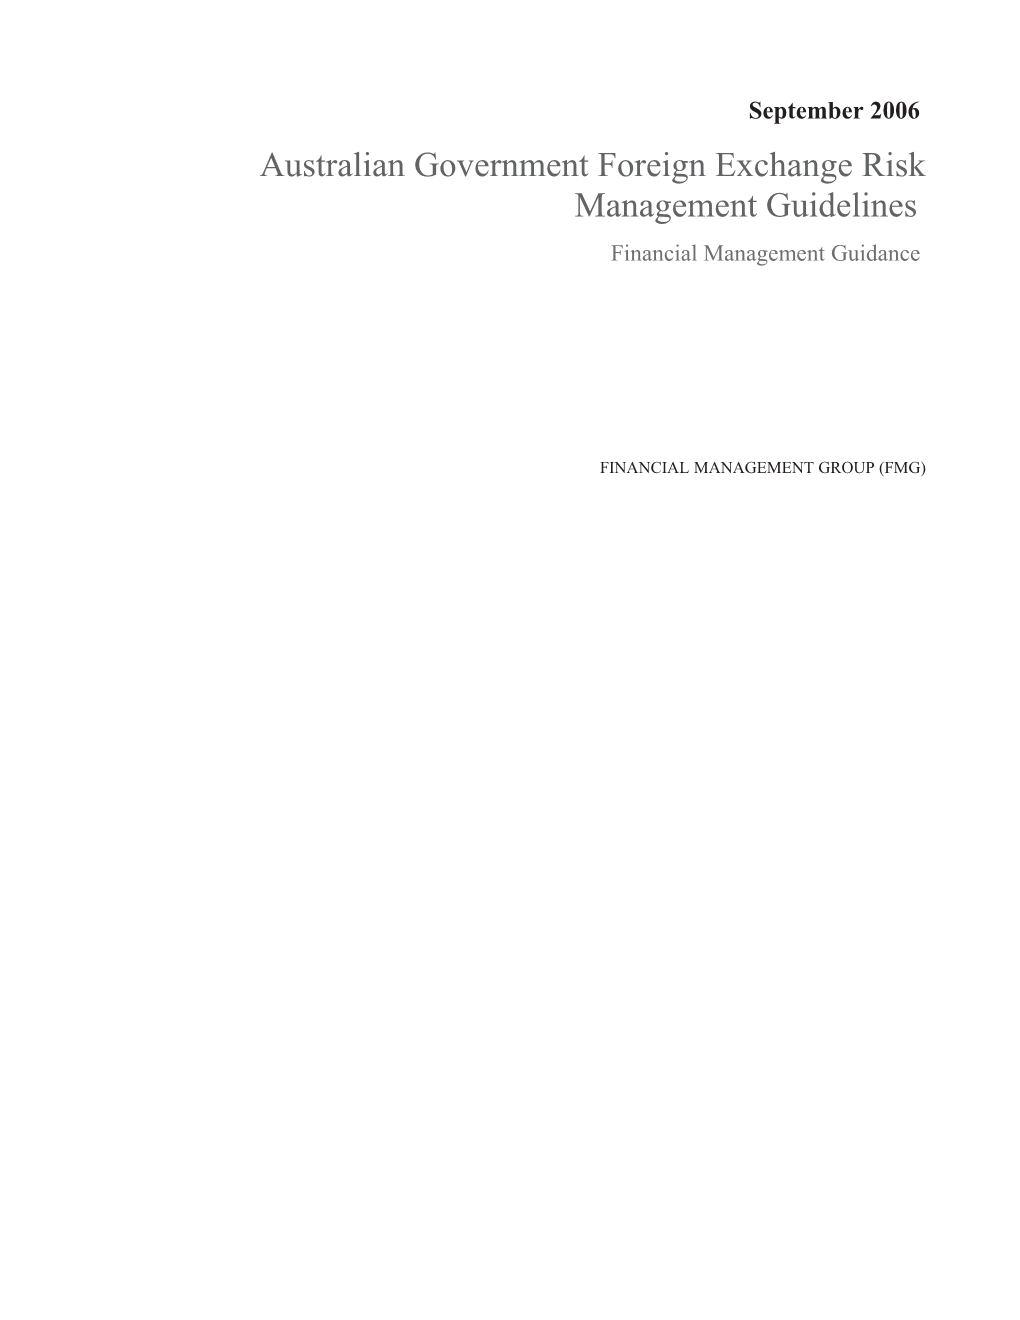 Australian Government Foreign Exchange Risk Management Guidelines